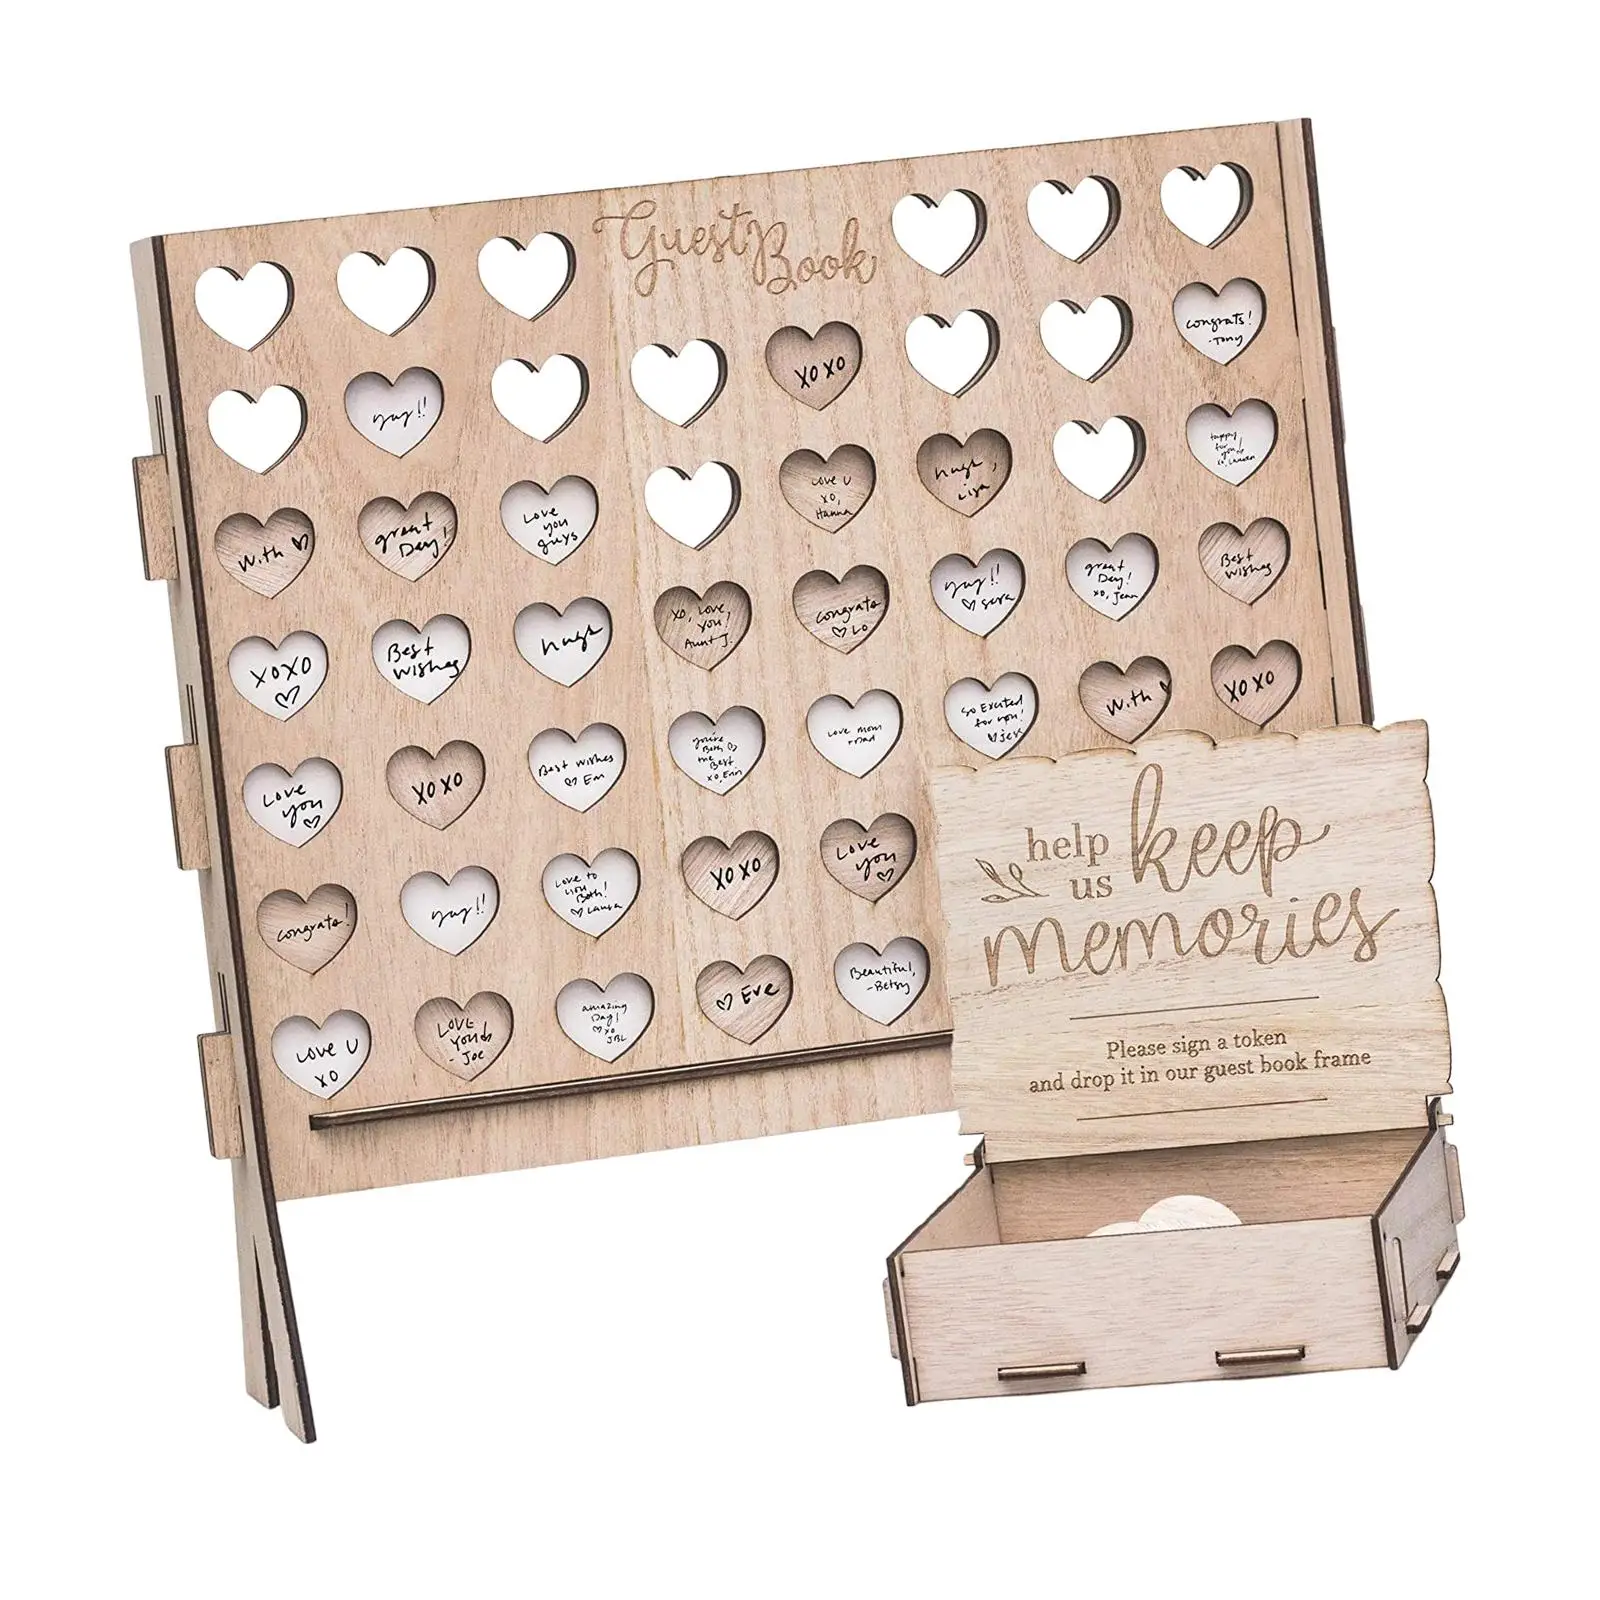 Rustic Wedding Reception Guest Book Decorative with Wooden Hearts Drop Box for Events Centerpiece Wedding Gift Reception Holiday